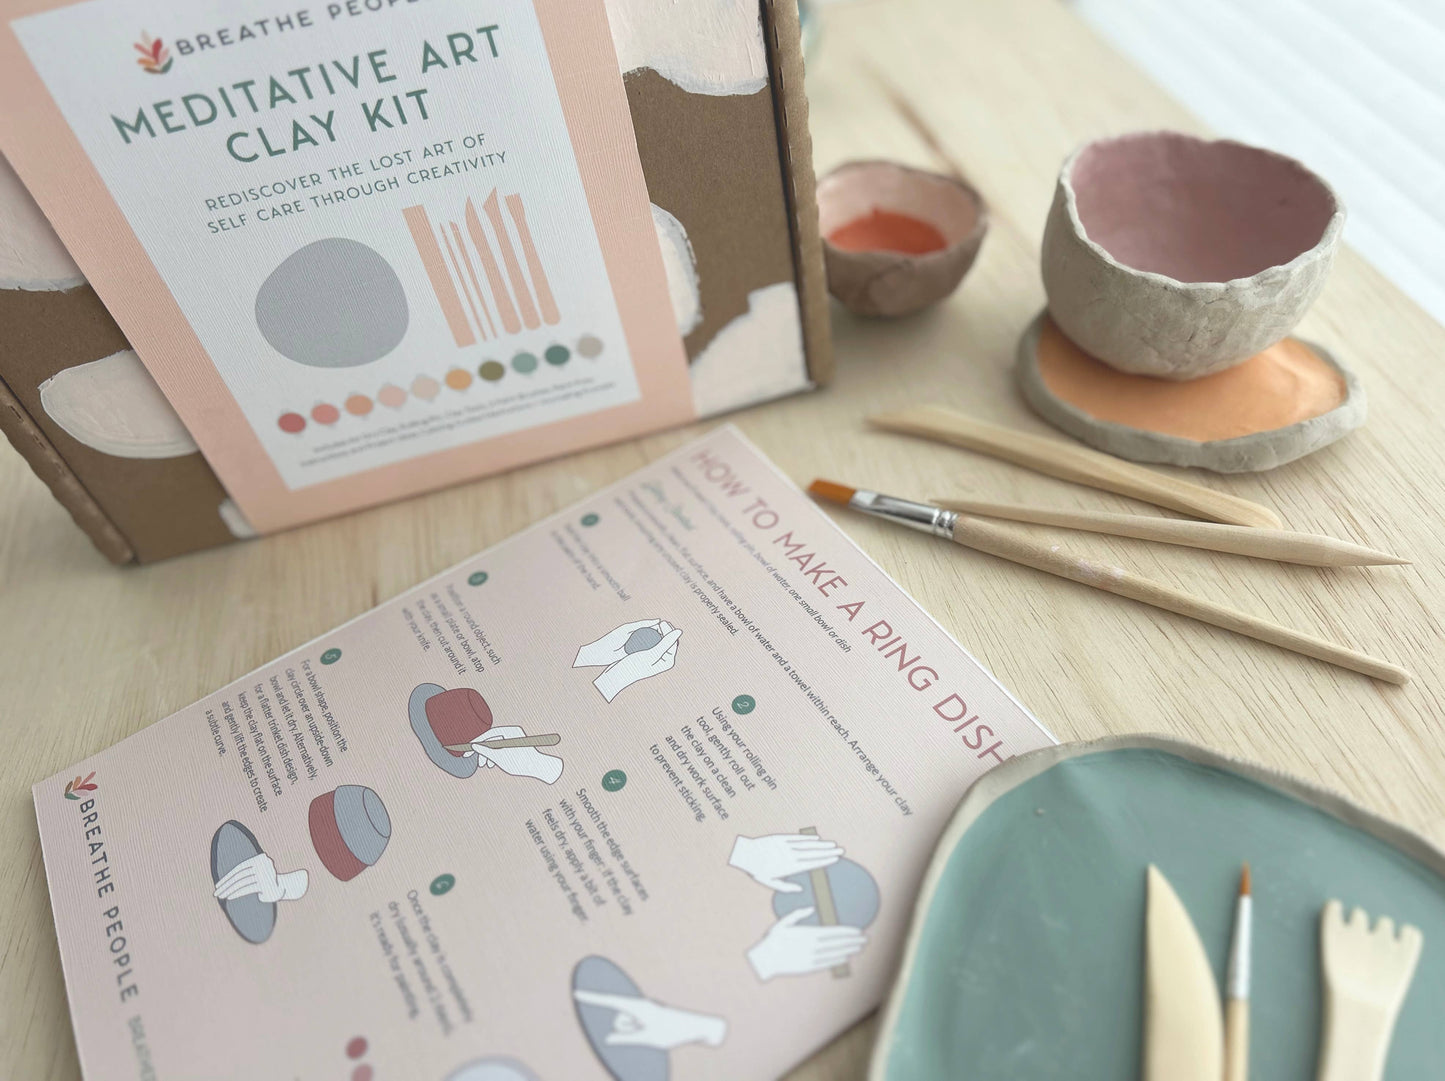 Deluxe Clay Date Activity Kit- Clay Kit for Two